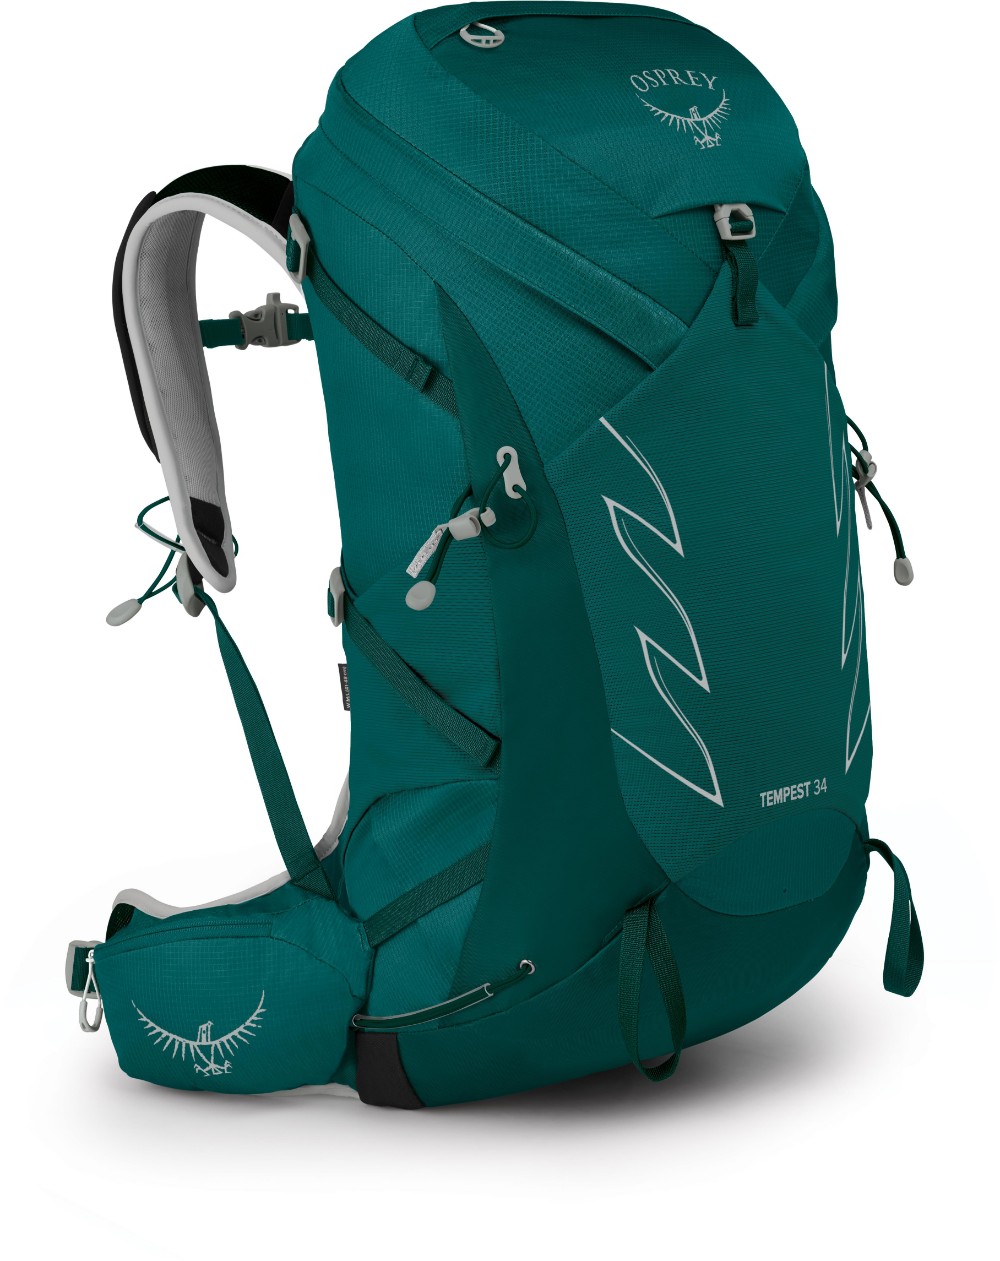 Tempest 34 Womens Hiking Backpack image 0